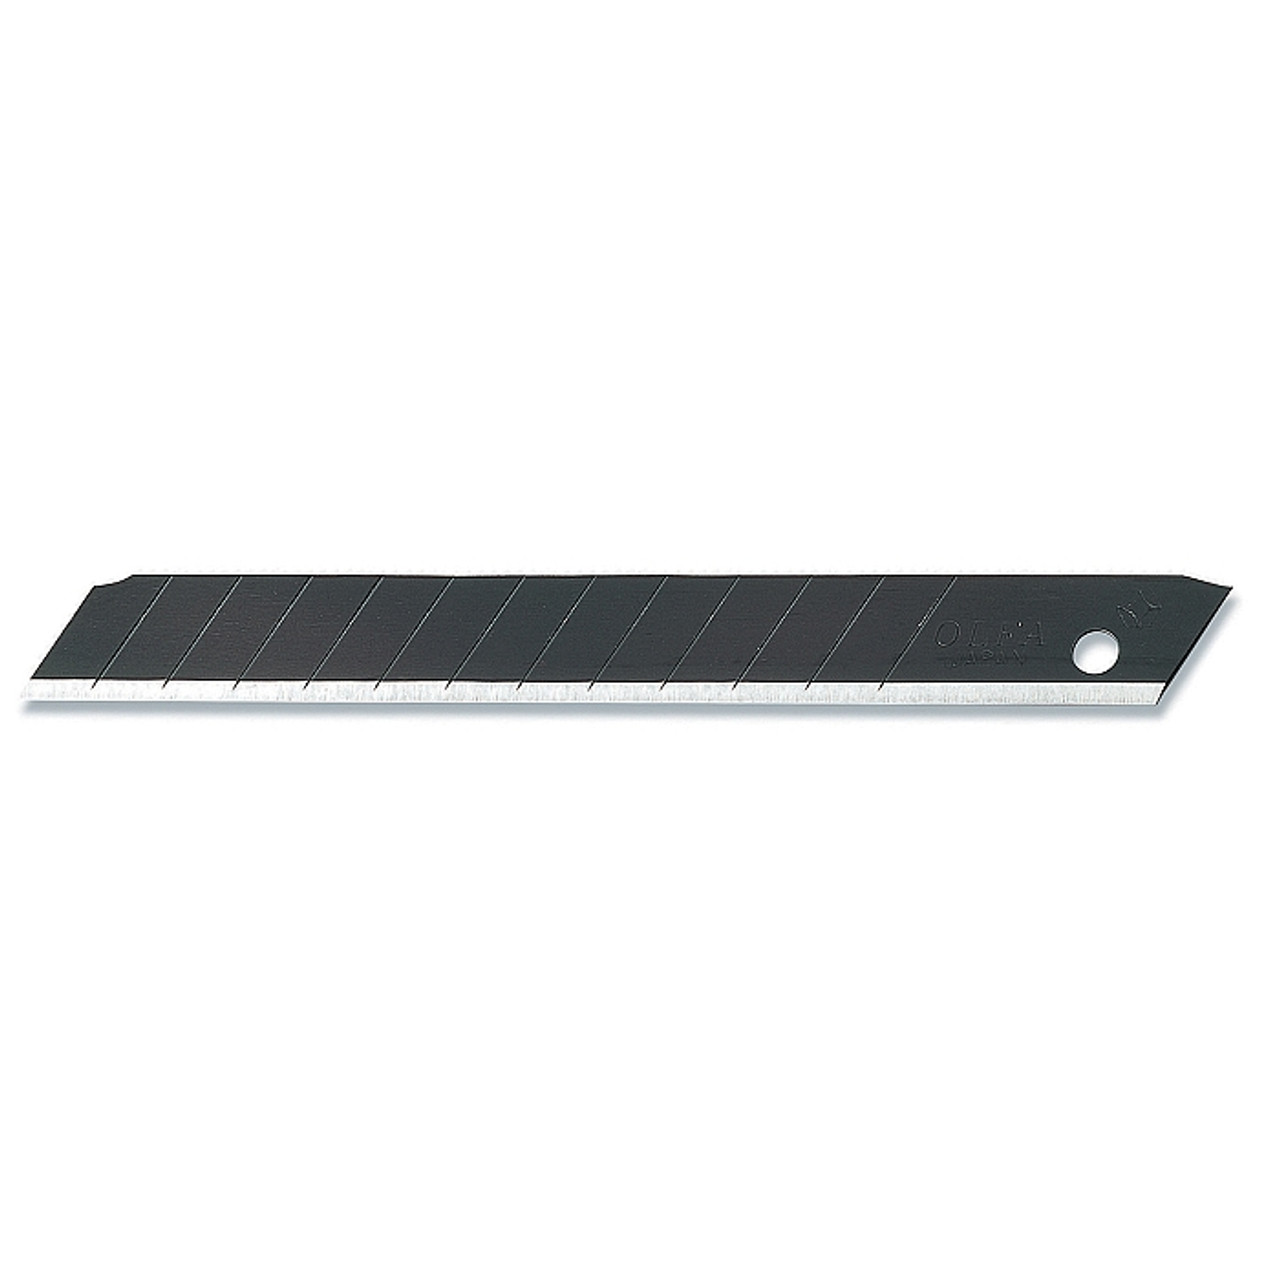 Olfa Snap Blade, 18mm - 5 count